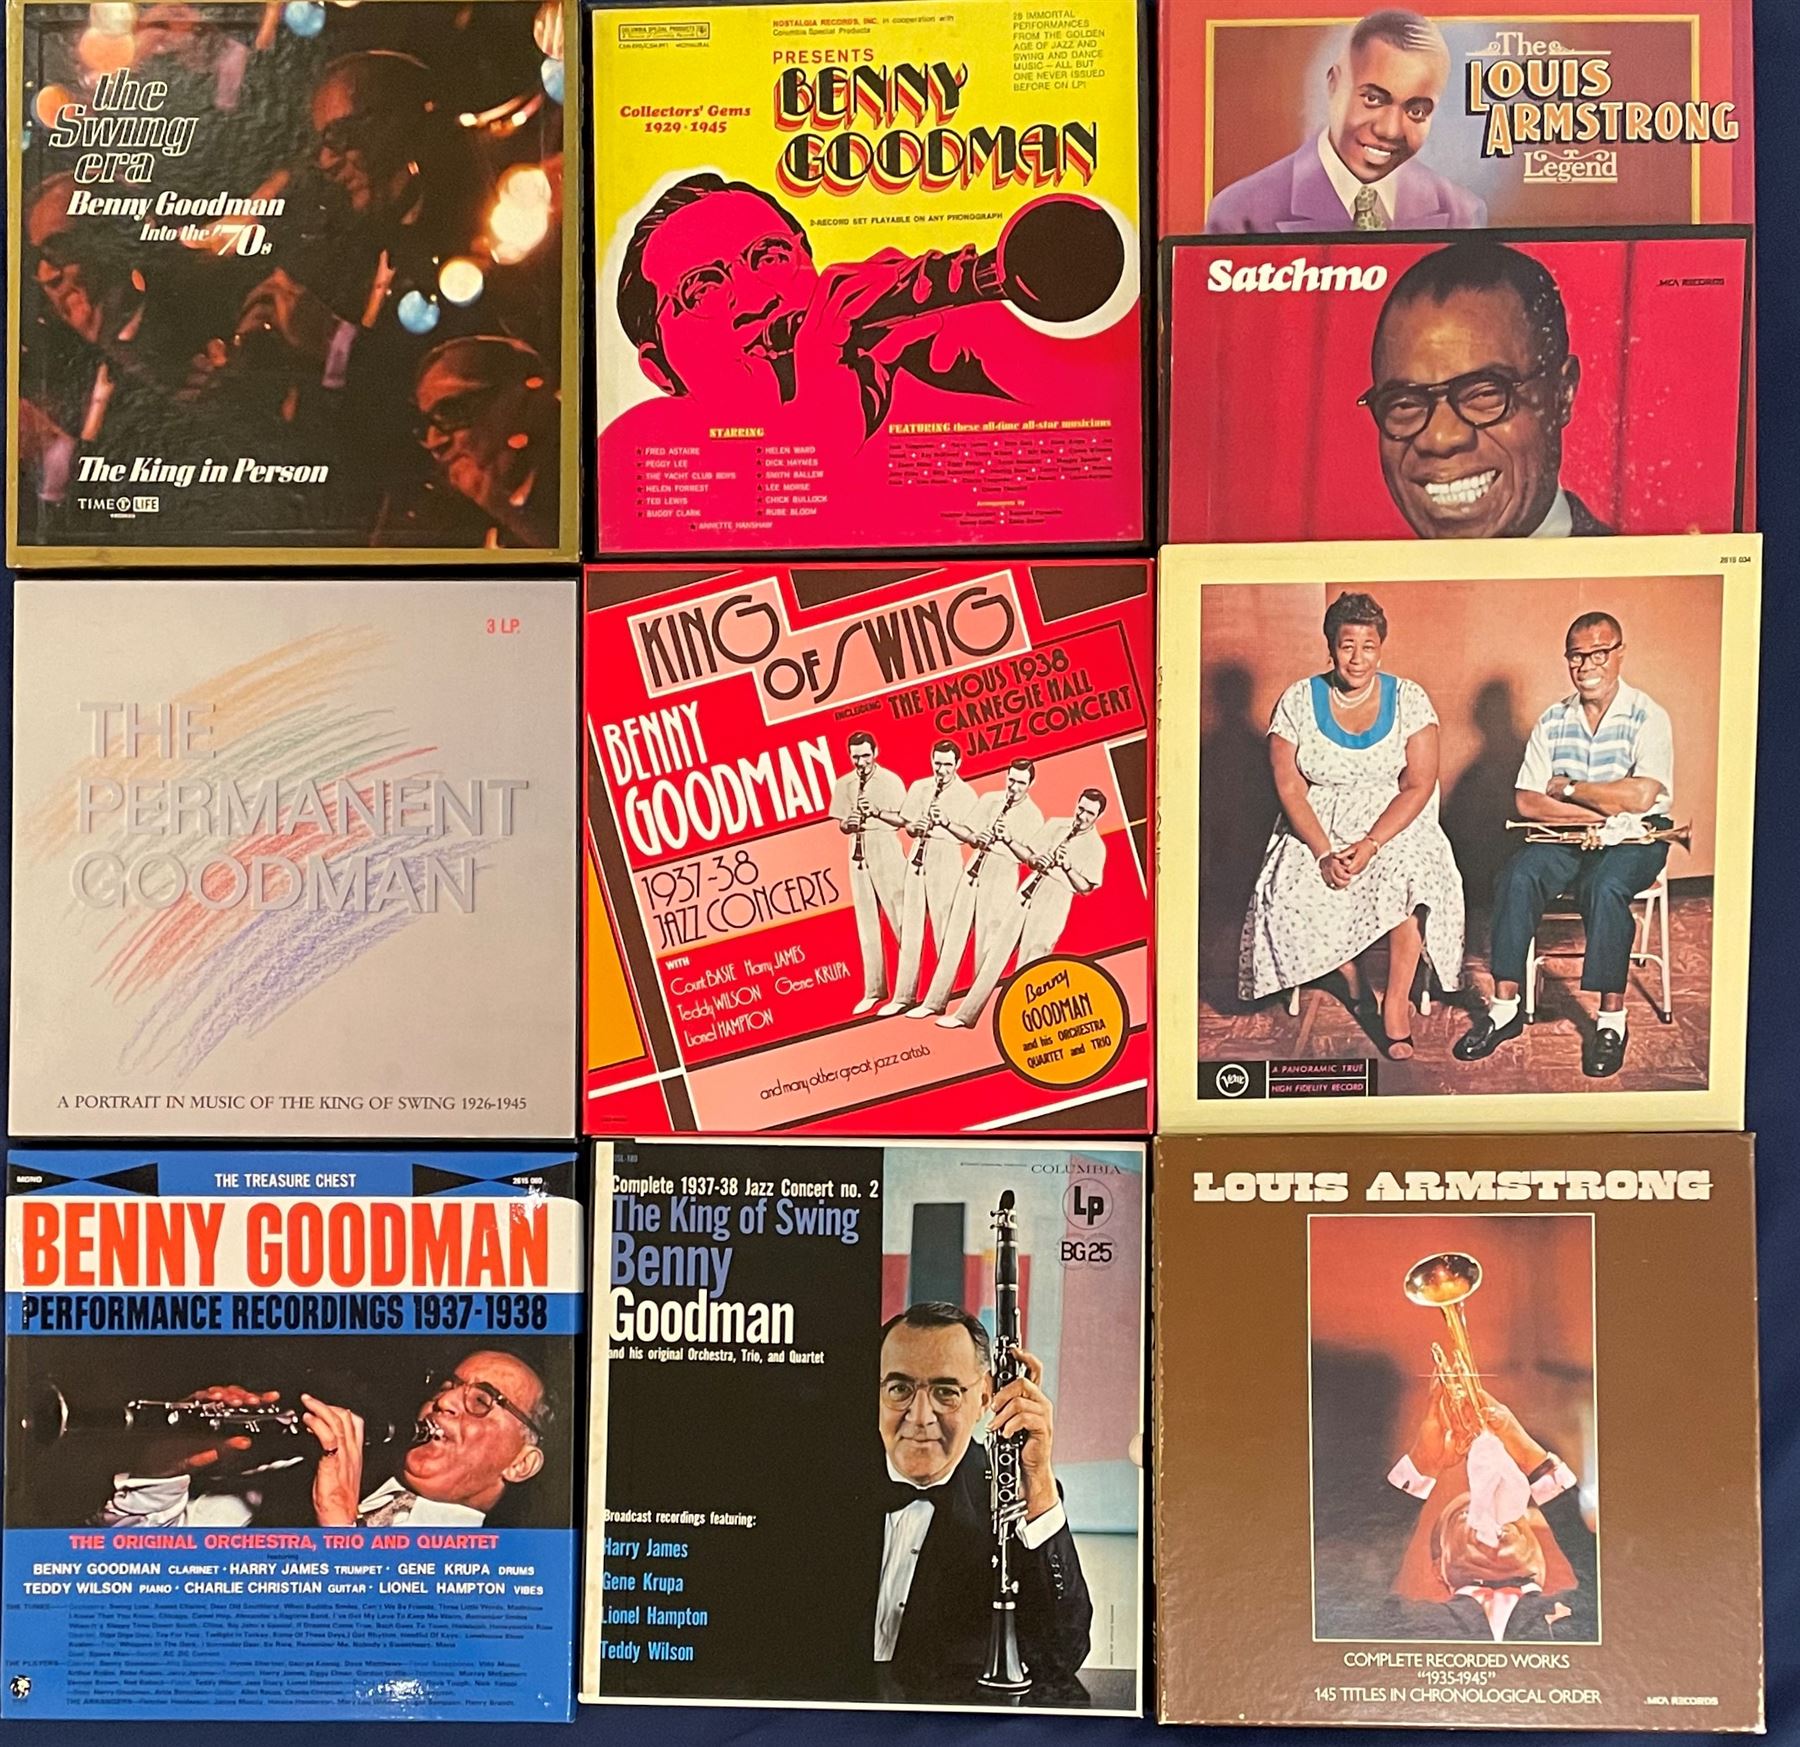 Louis Armstrong & Benny Goodman LP box sets: The Louis Armstrong Legend